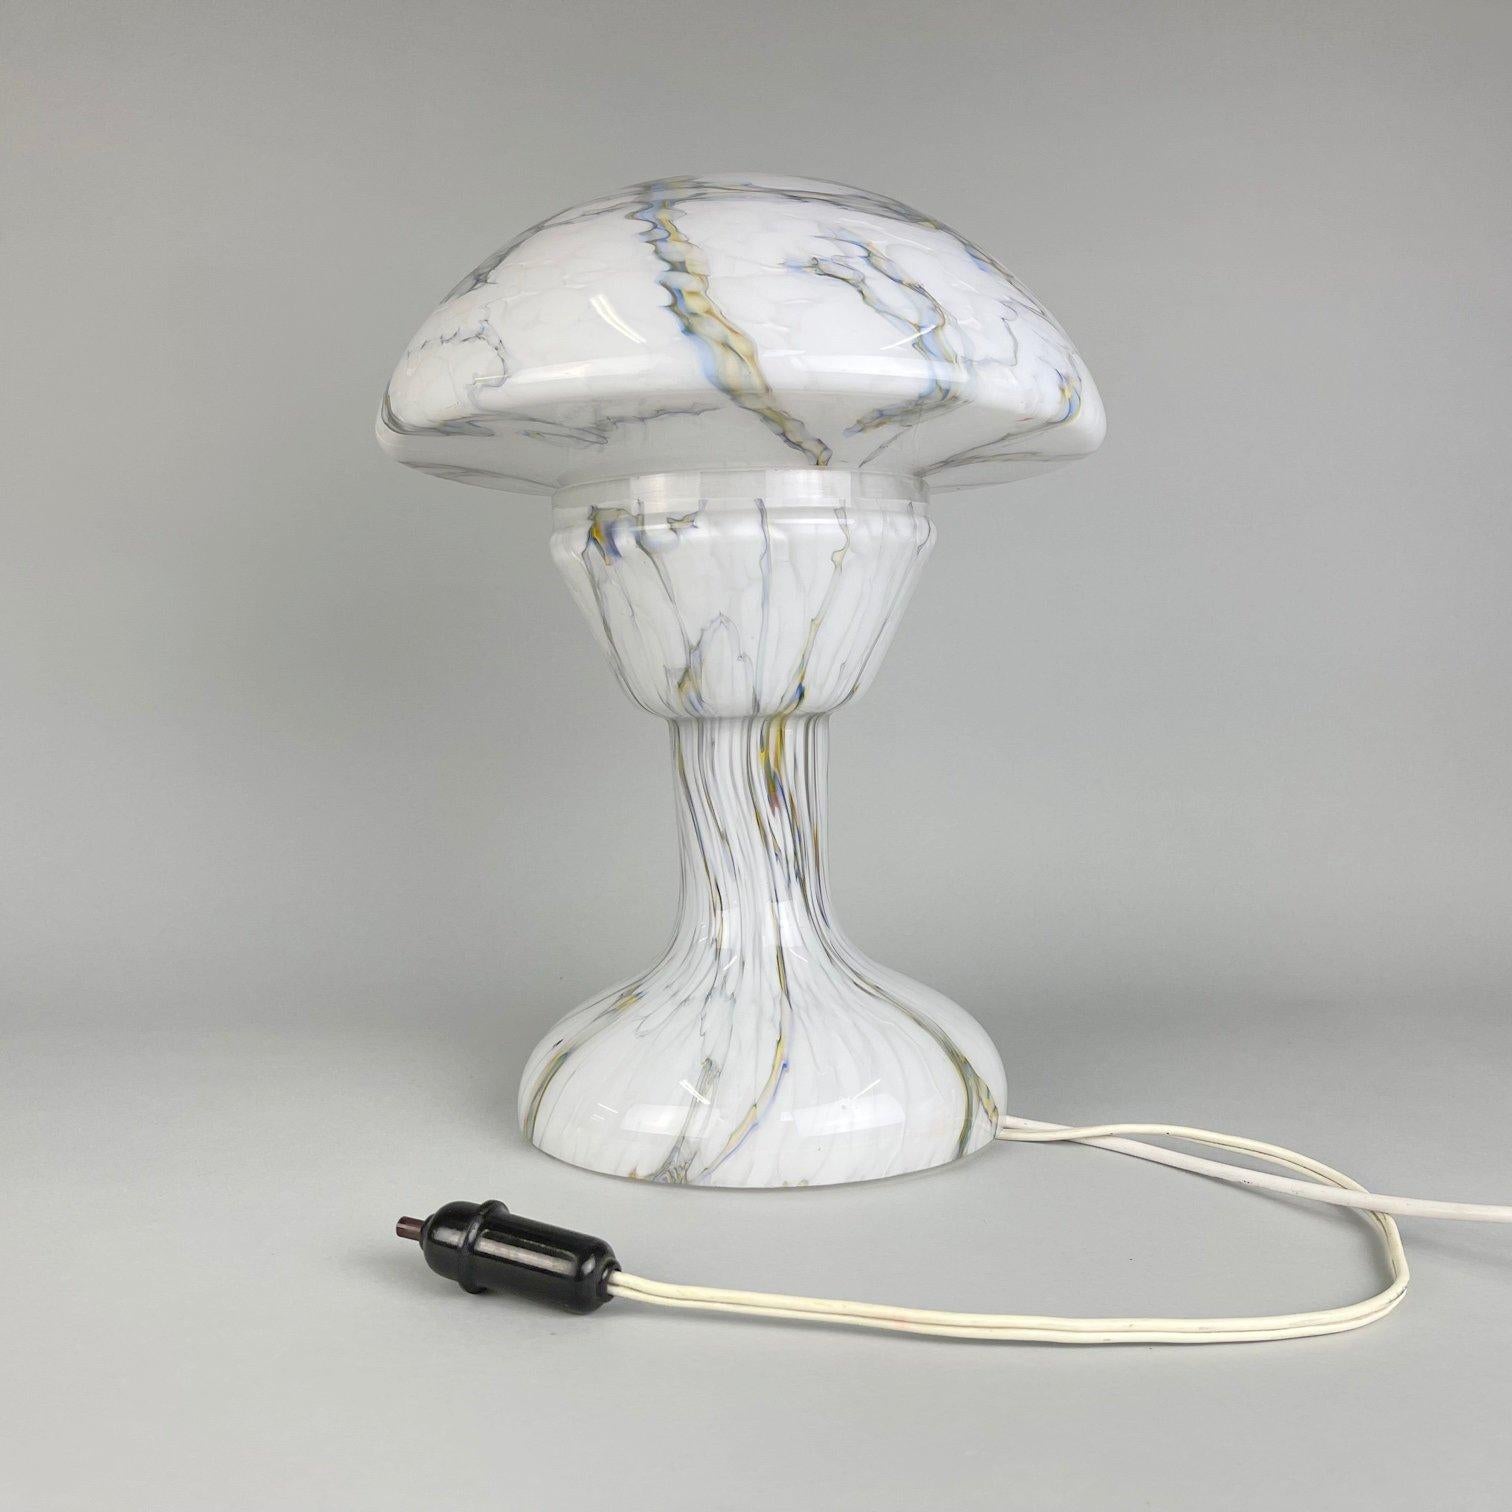 Rarely seen, vintage table lamp made of marbled glass. Partially new wiring. The cable is new, connected to an original part. The switch is original and fully functional. Bulbs: 1 x E27 or E26.